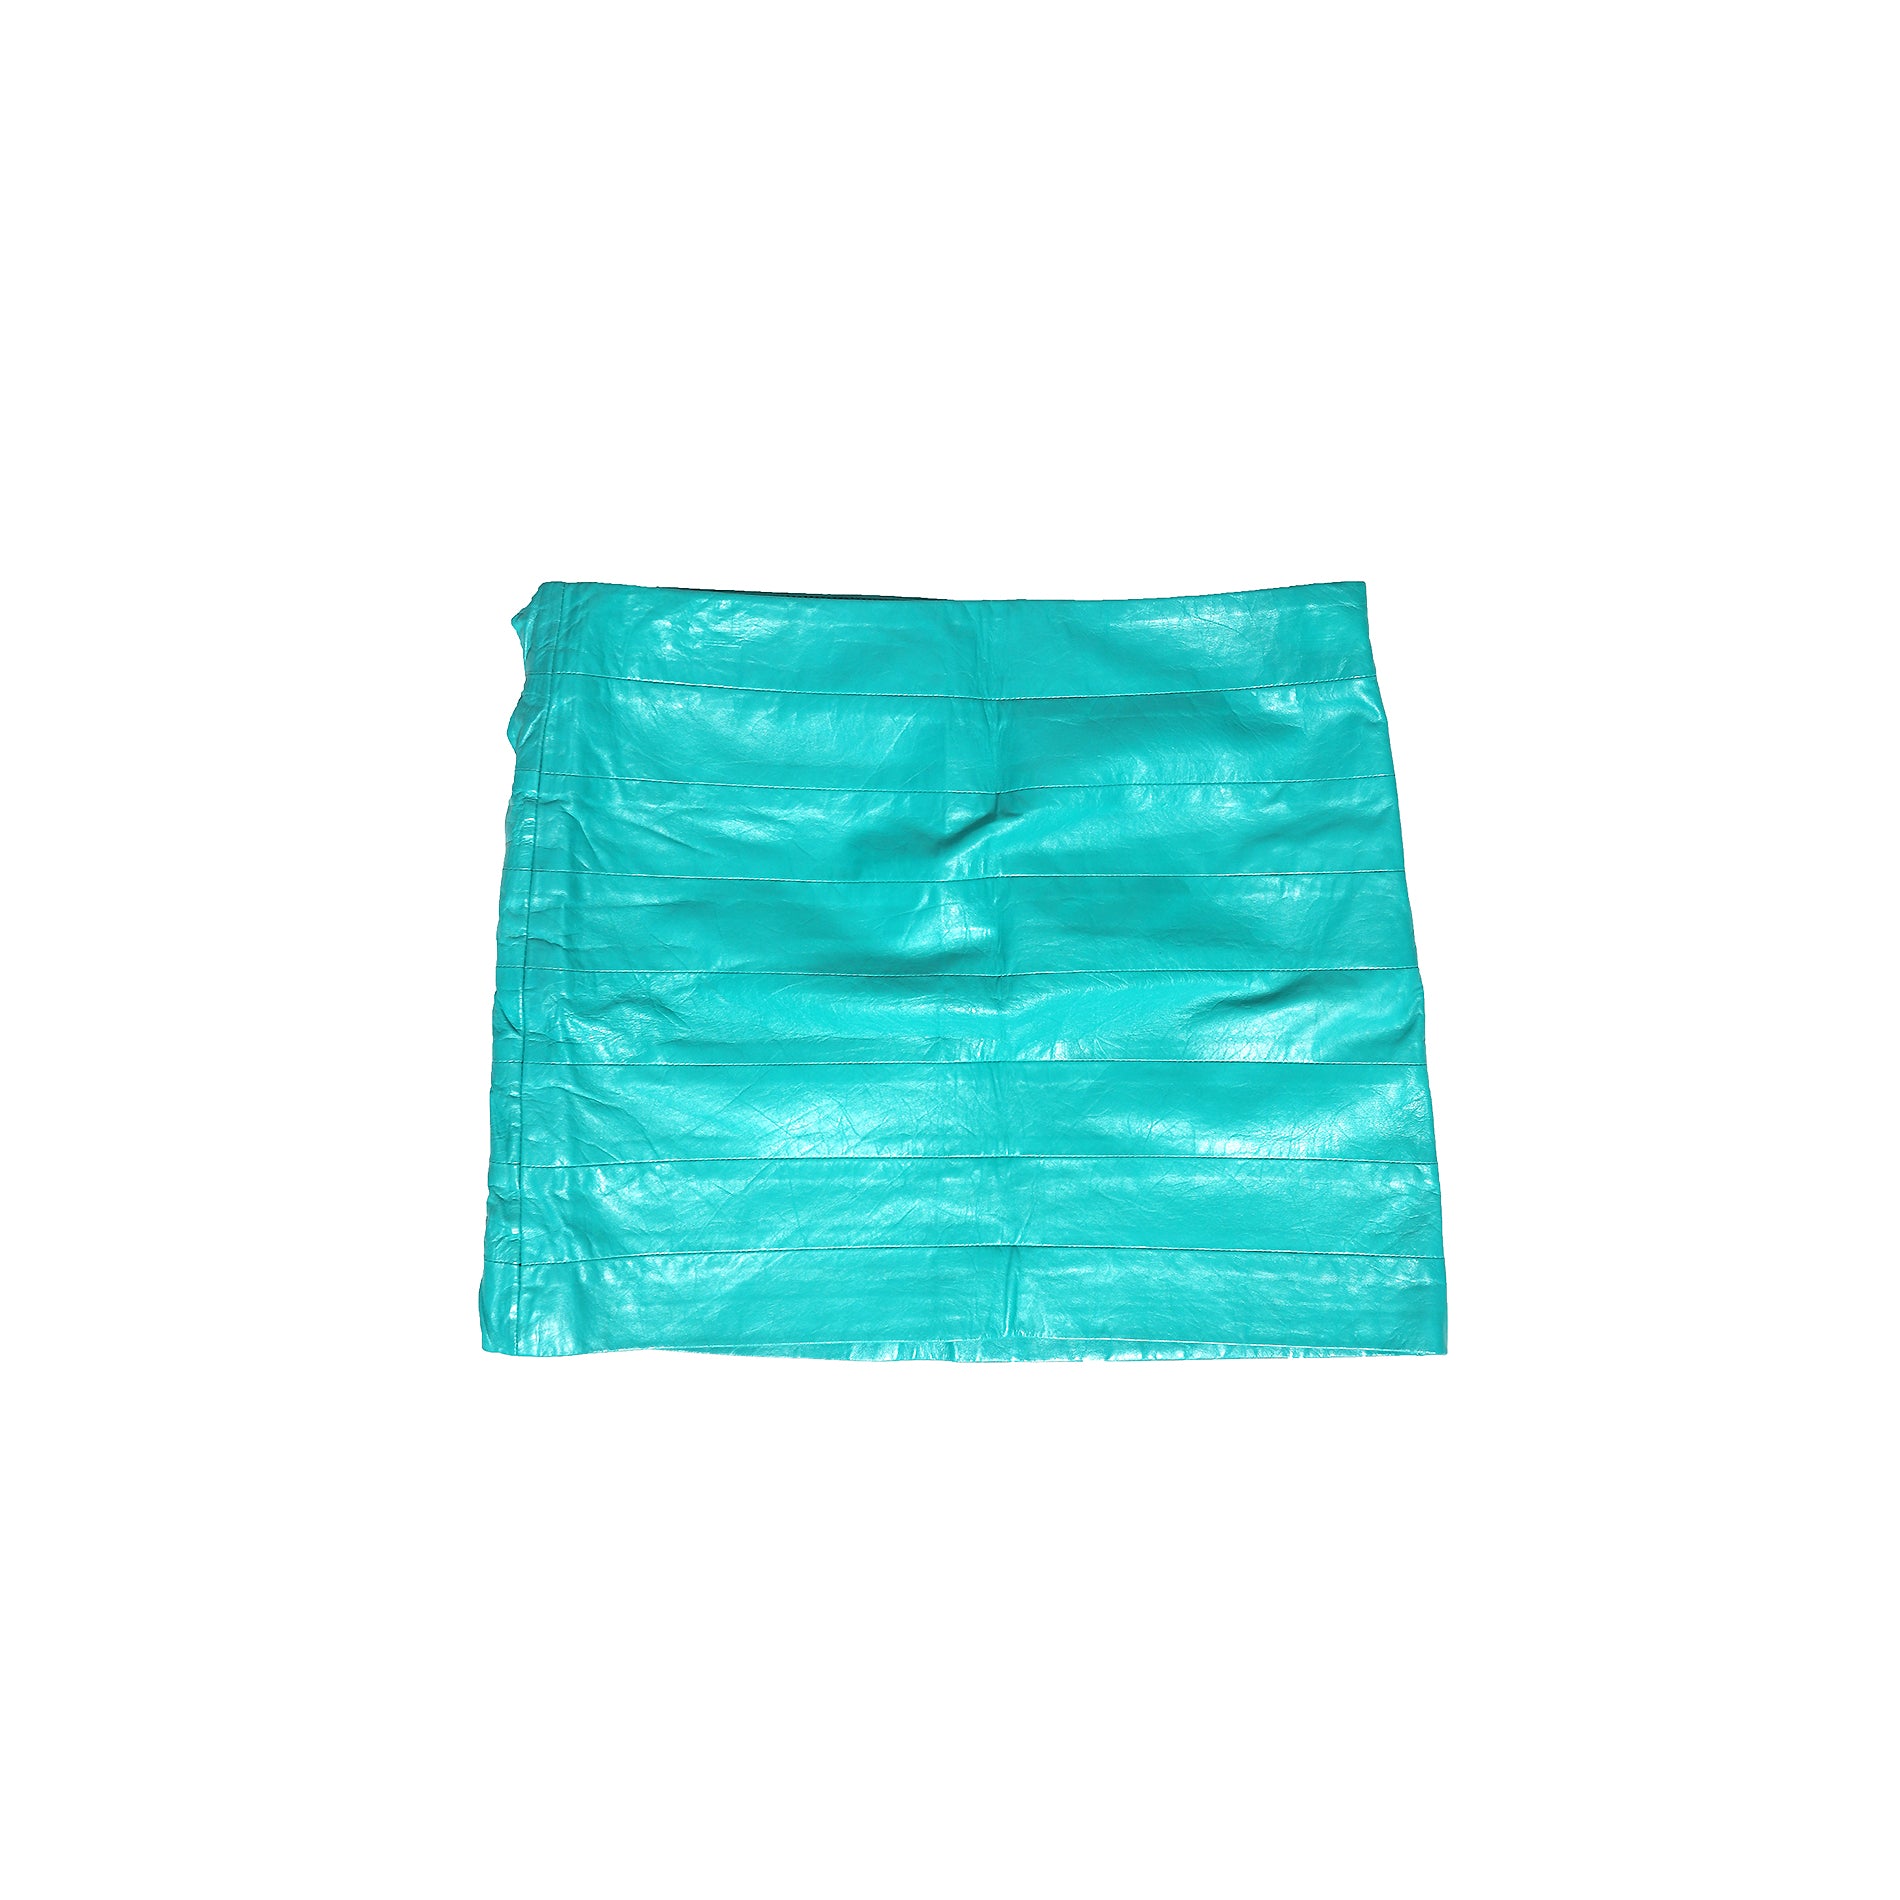 Gianni Versace 90s Teal Cutout Twisted Detail Skirt